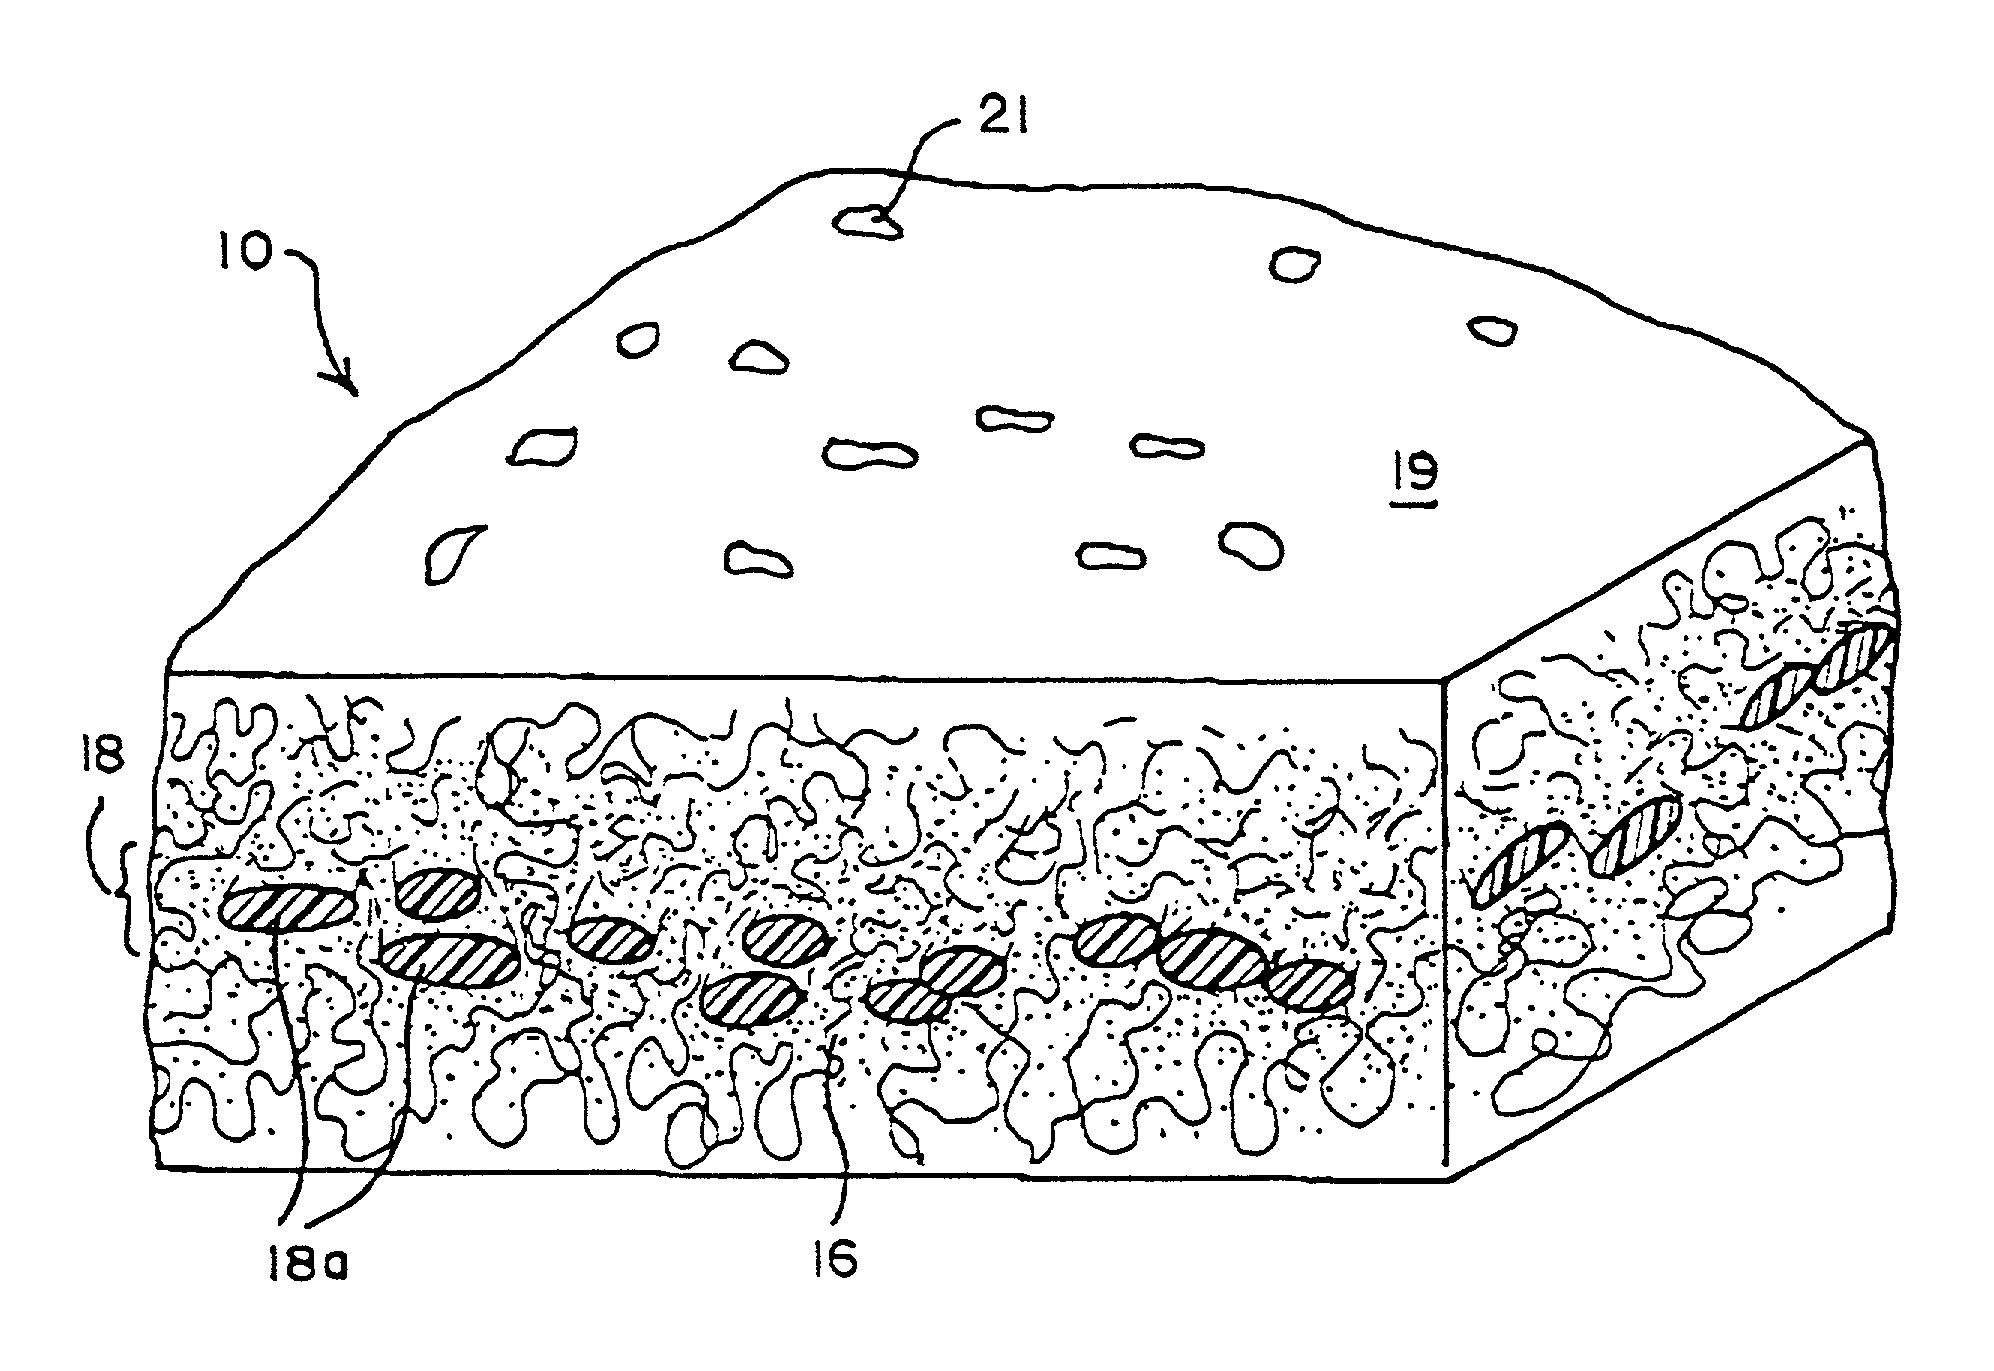 Composite membranes and methods for making such membranes